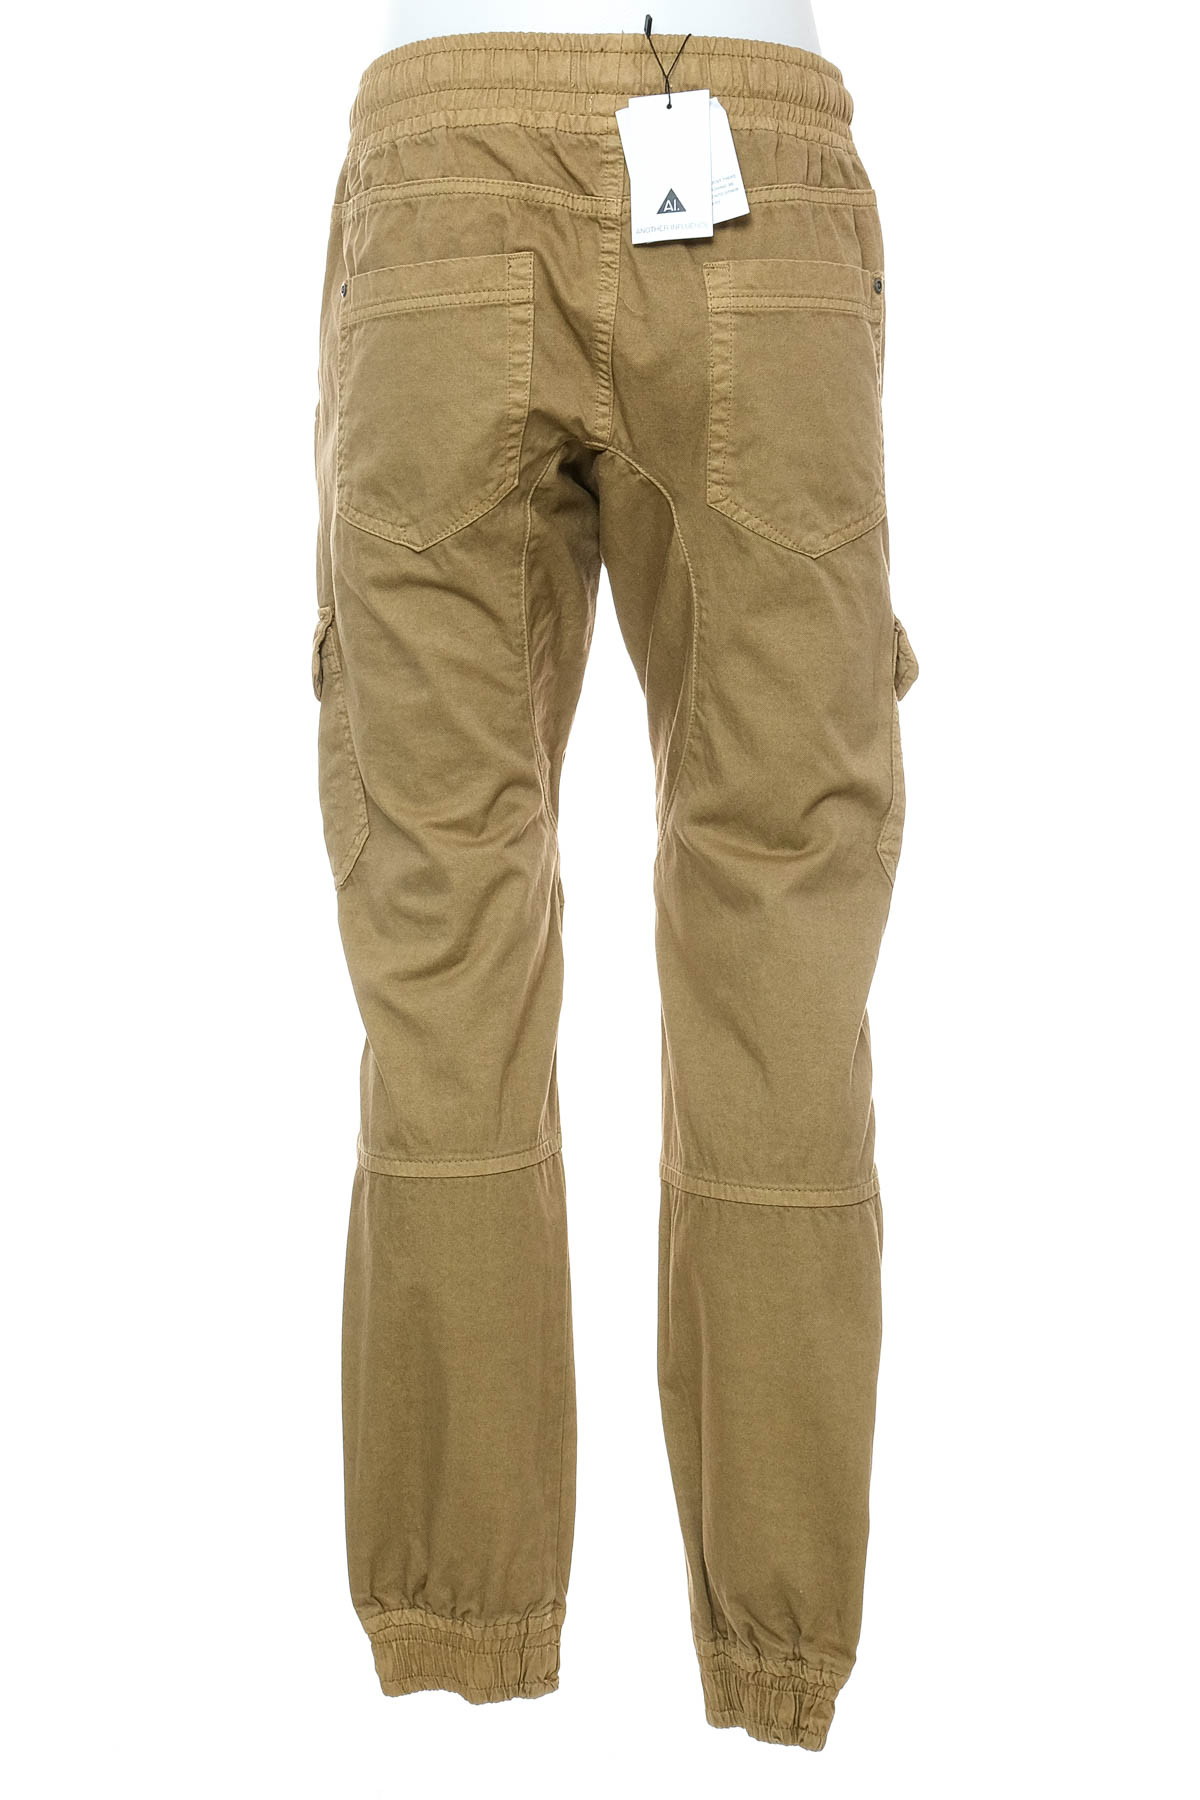 Men's trousers - Another Influence - 1